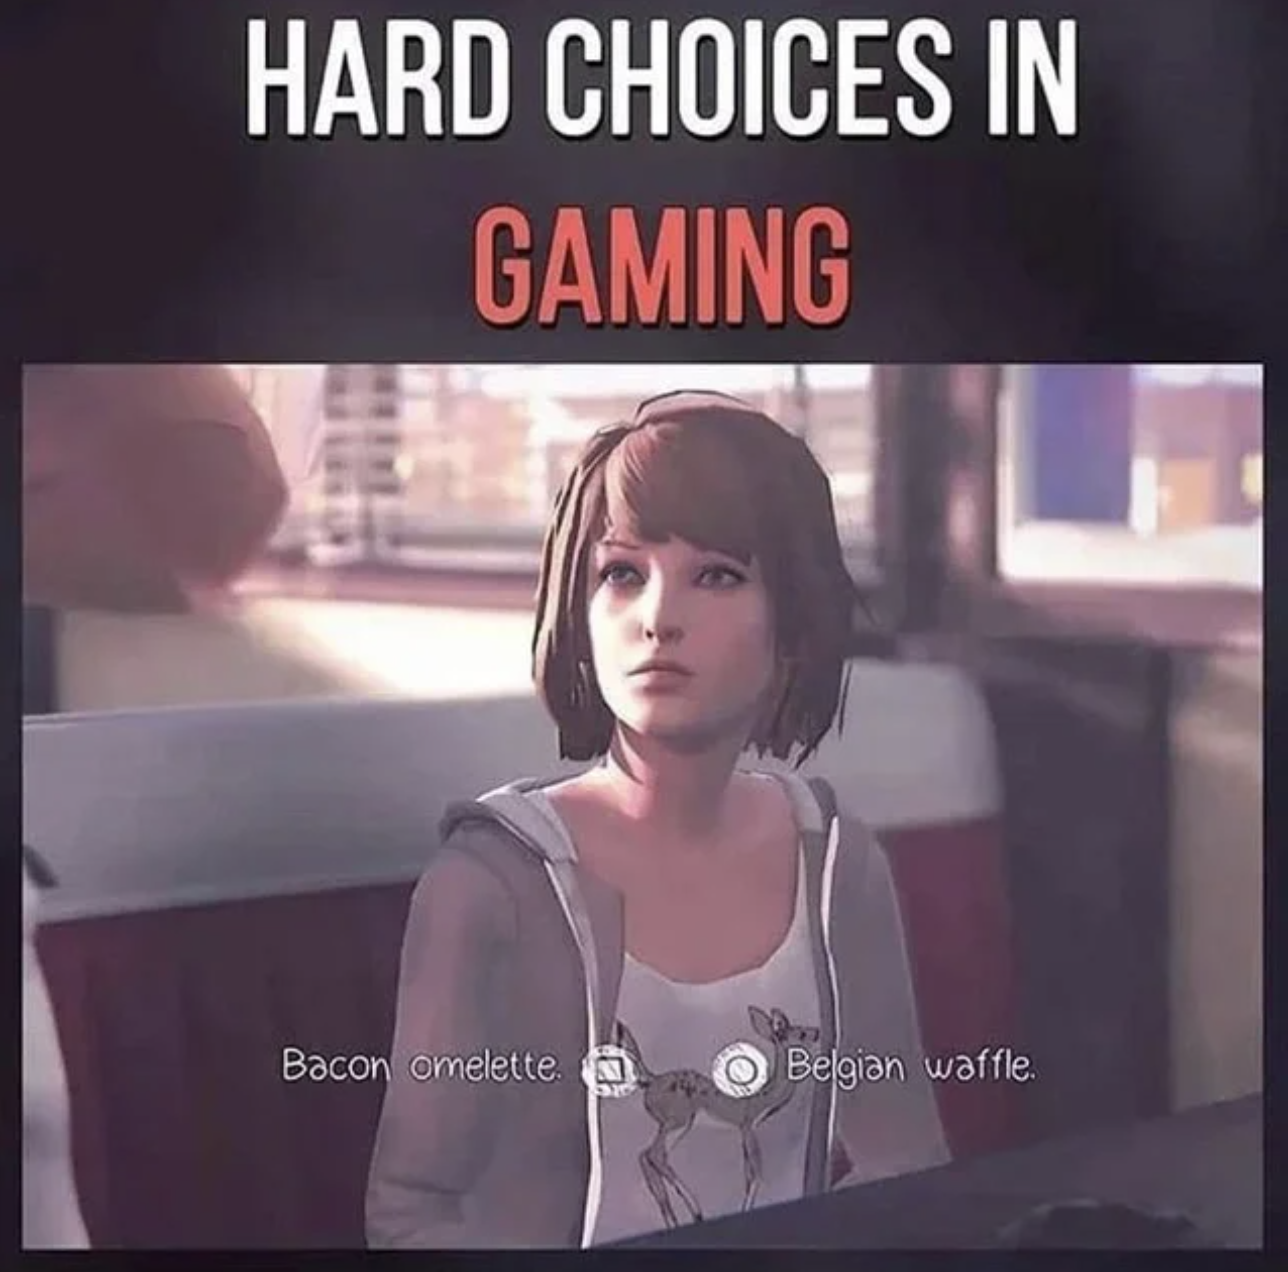 Gaming Memes - hardest choice meme - Hard Choices In Gaming Bacon omelette Belgian waffle